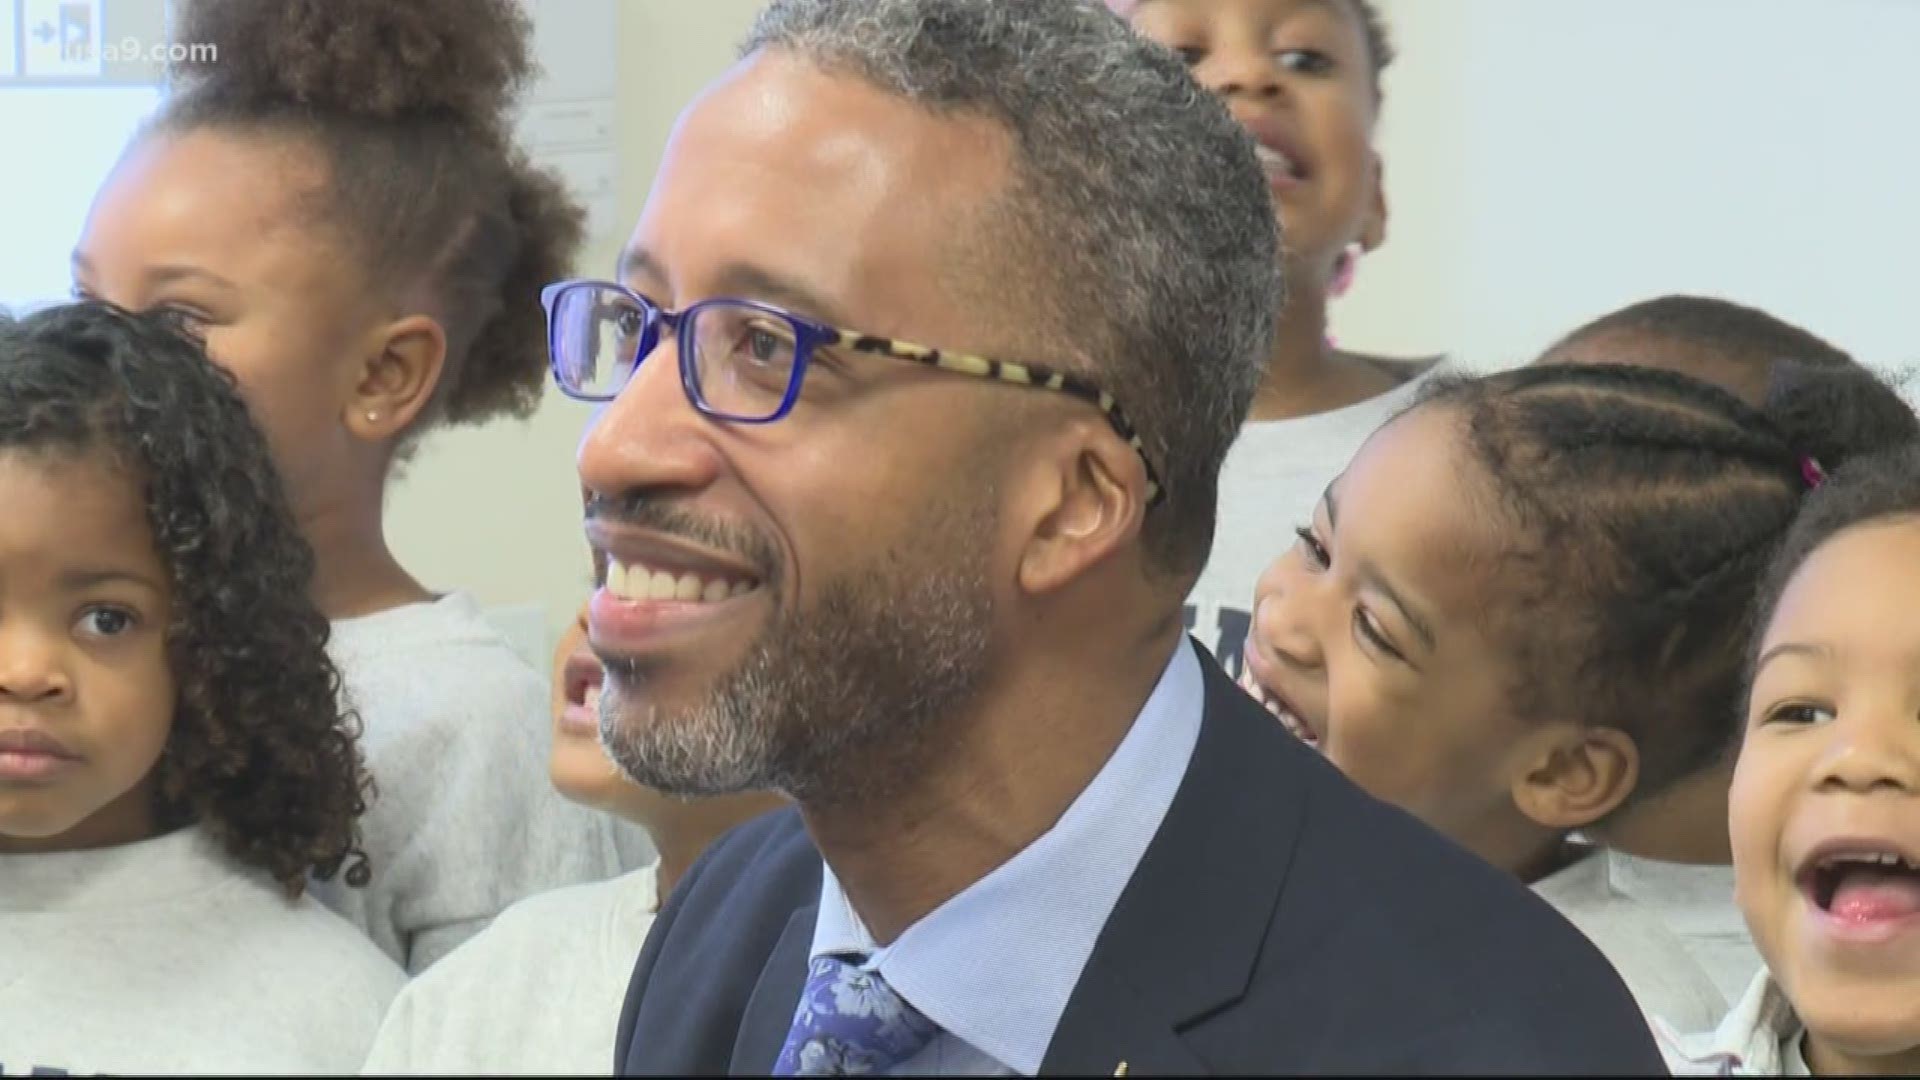 This D.C. Councilman wants to adopt the African American History and Inclusion act into D.C. Schools. If passed, it would add more requirements to graduate.